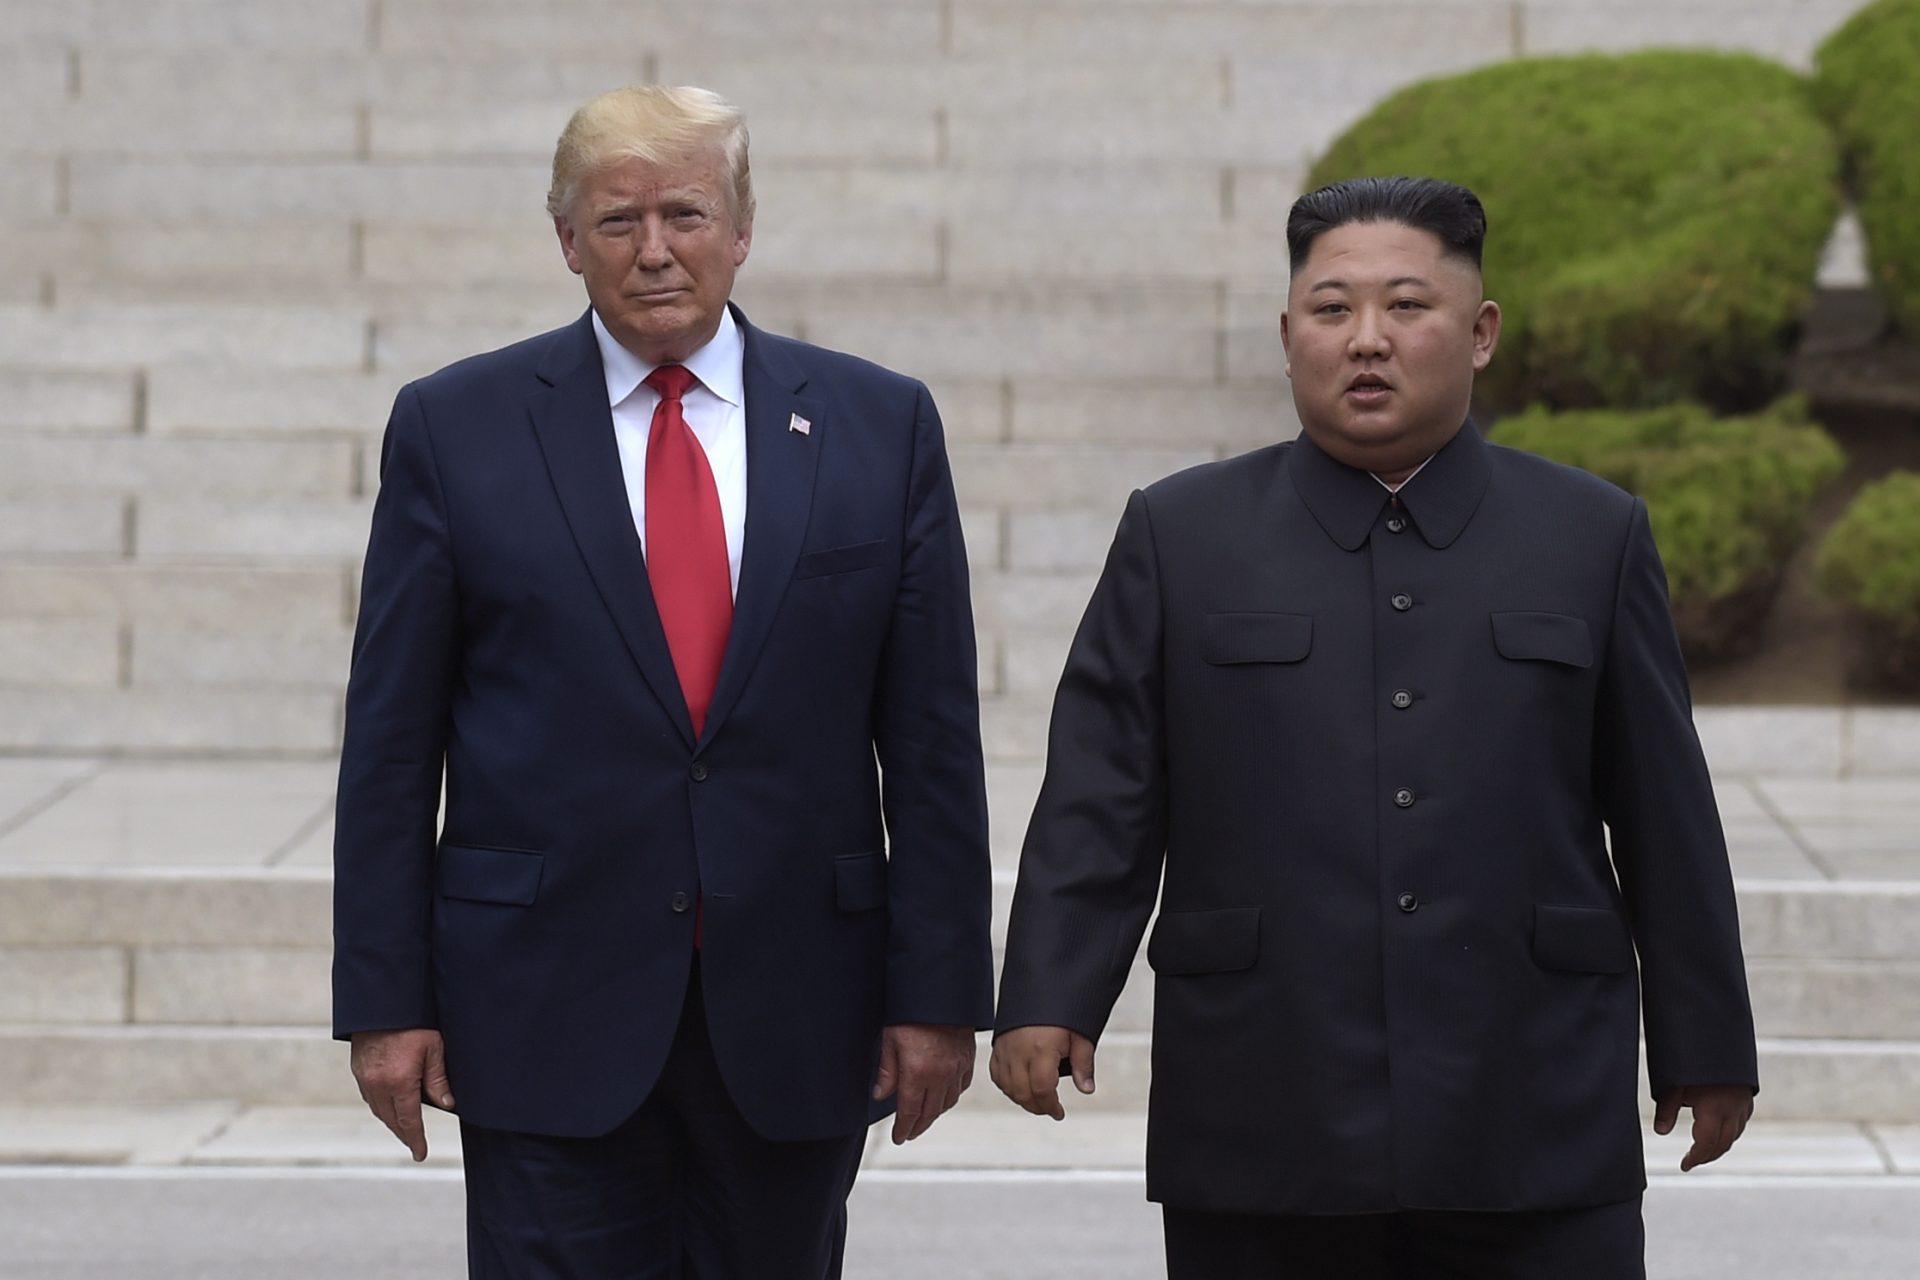 President Donald Trump, left, meets with North Korean leader Kim Jong Un at the North Korean side of the border at the village of Panmunjom in Demilitarized Zone, Sunday, June 30, 2019.